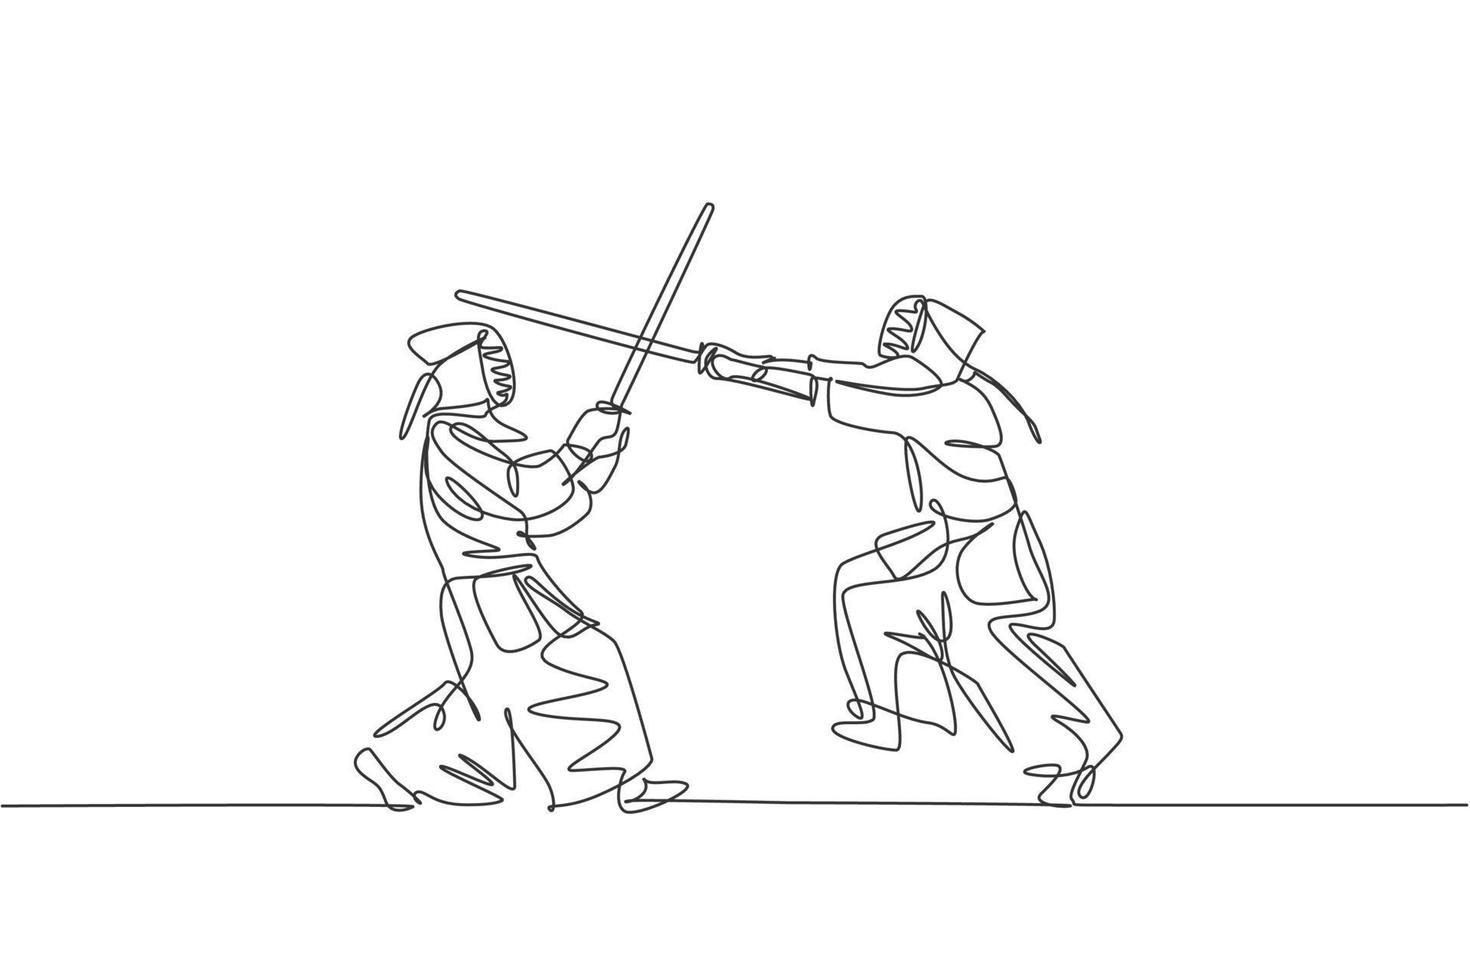 One single line drawing of two young energetic men exercise kendo combat game with wooden sword at gym center vector illustration. Combative fight sport concept. Modern continuous line draw design